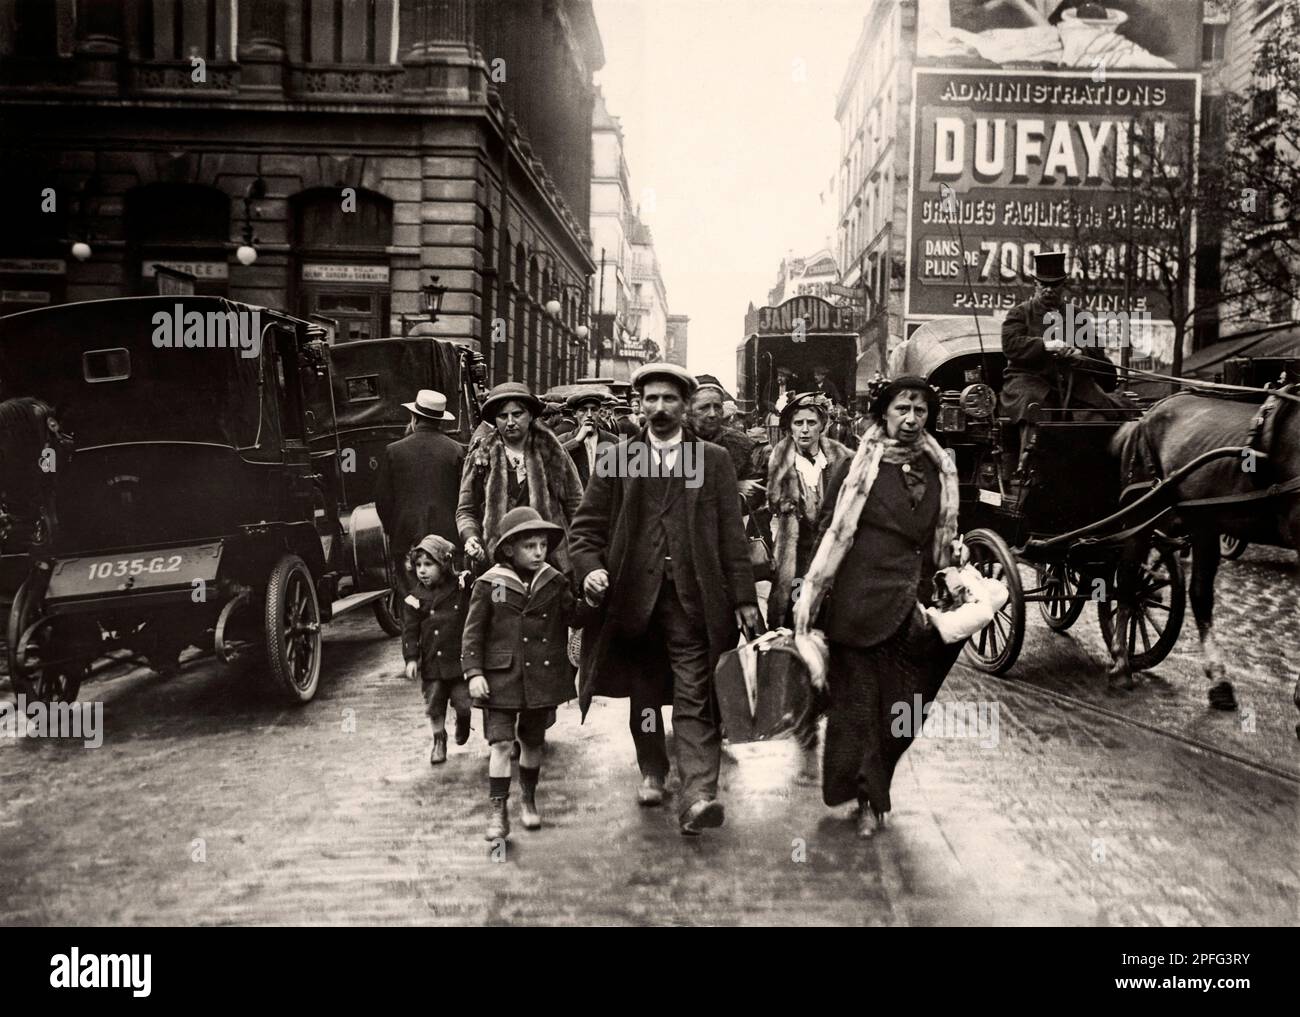 French Immigration - 'Here is a train coming from the north, we see several families who, terrified by the raid of the Germans, come to ask for hospitality'. Family with luggage (men, women and children) walking up a street with their luggage in the middle of road traffic. Horse-drawn carriages, coachman. Immigration. First World War. Paris. Great War. War of 14-18. North Station? Stock Photo